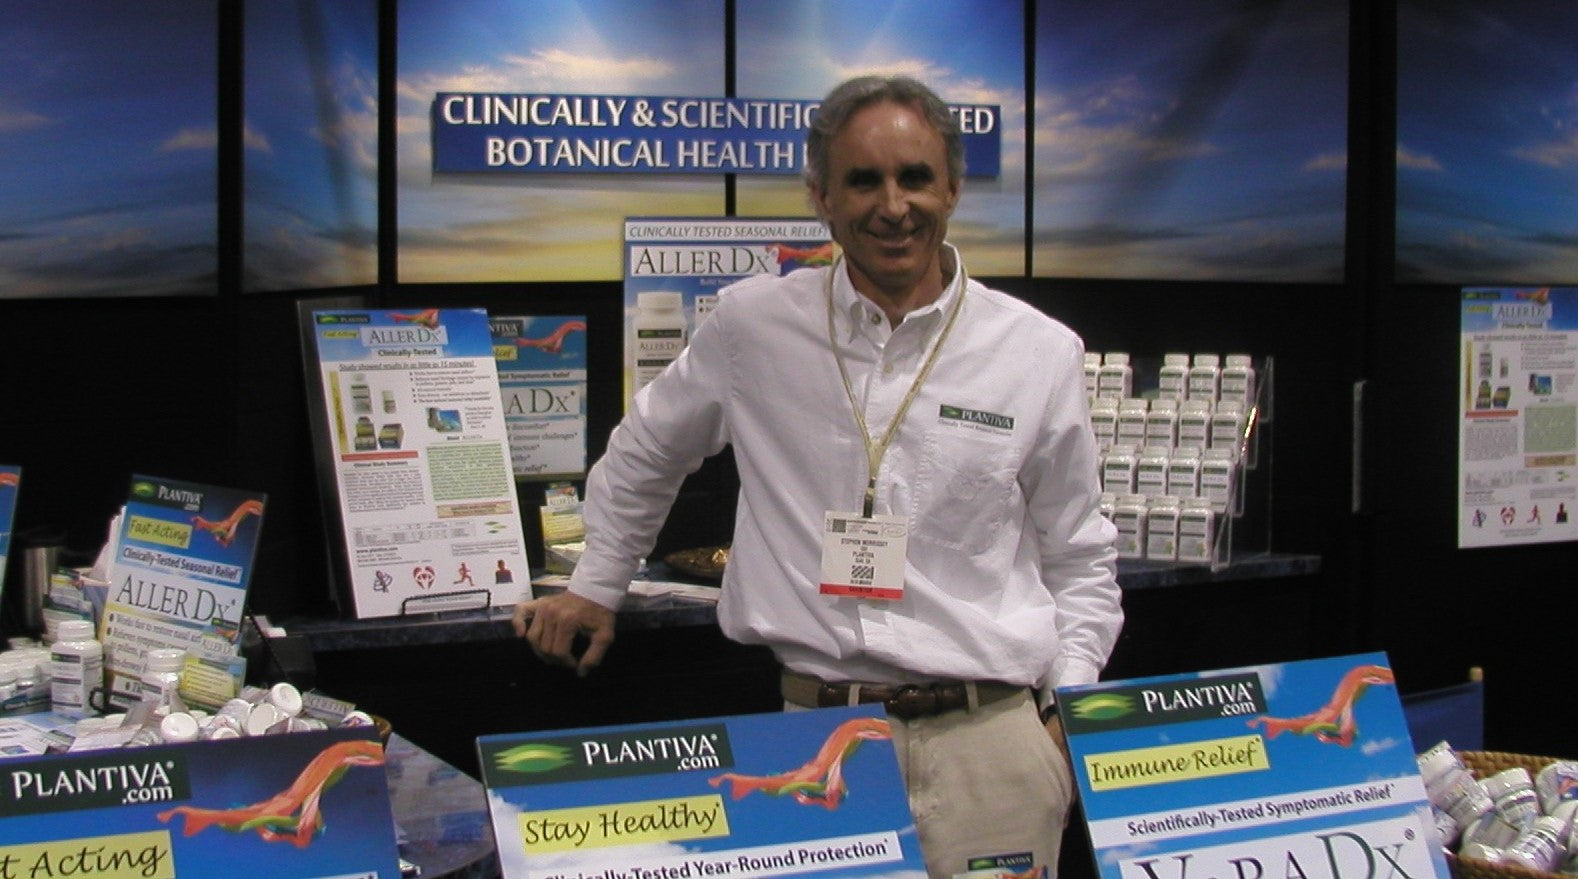 A man stands at a trade show booth with the Plantiva logo